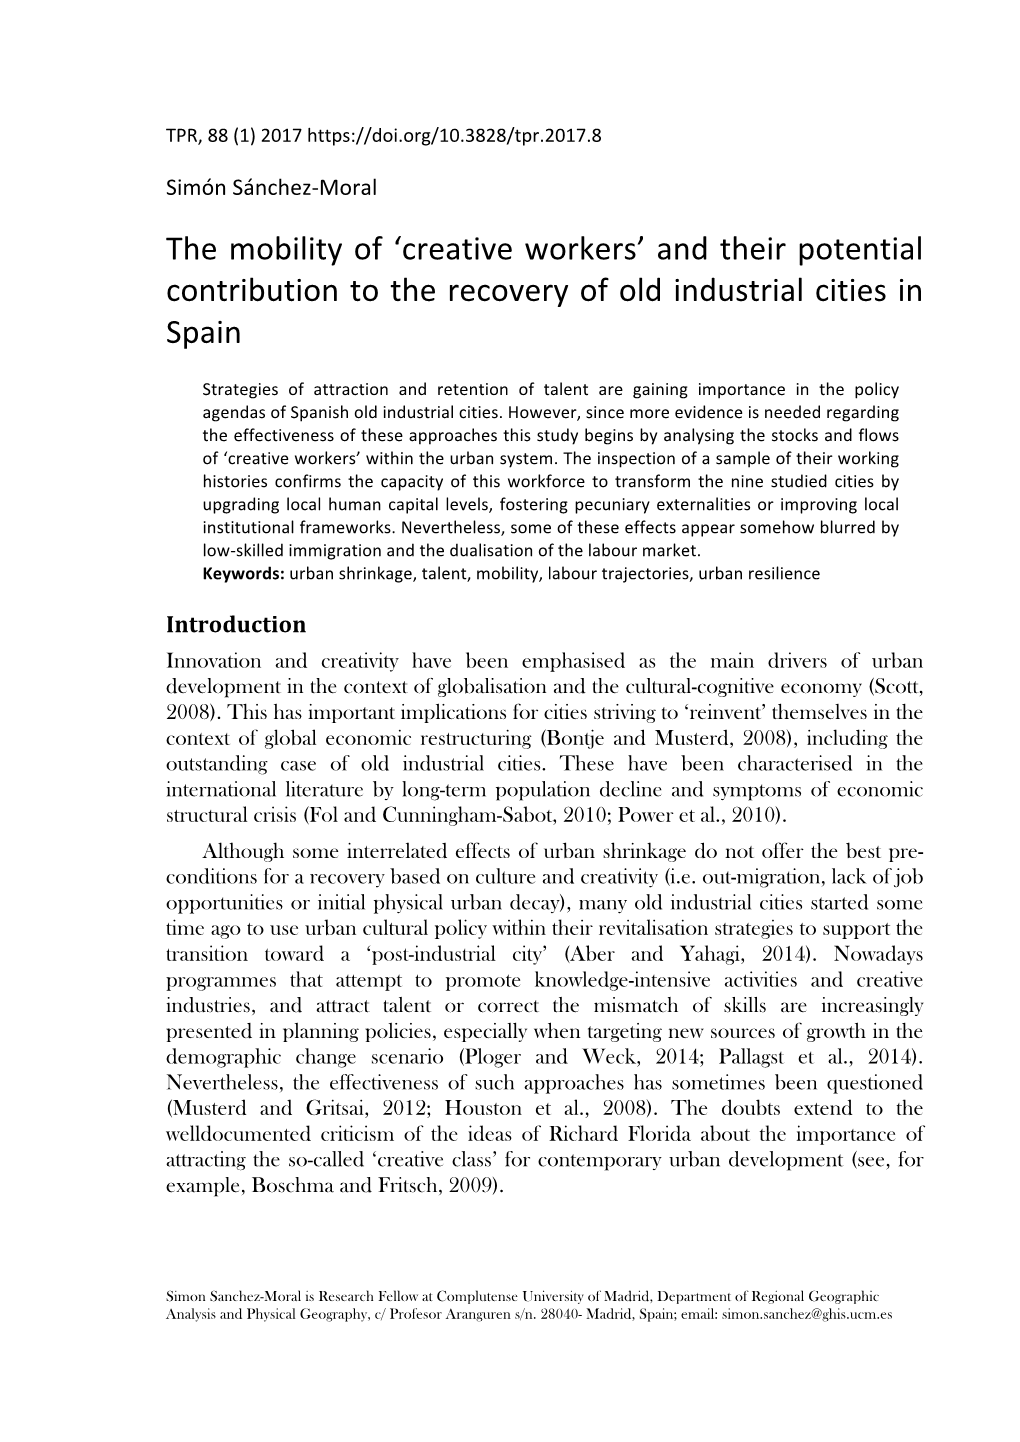 The Mobility of 'Creative Workers' and Their Potential Contribution to the Recovery of Old Industrial Cities in Spain